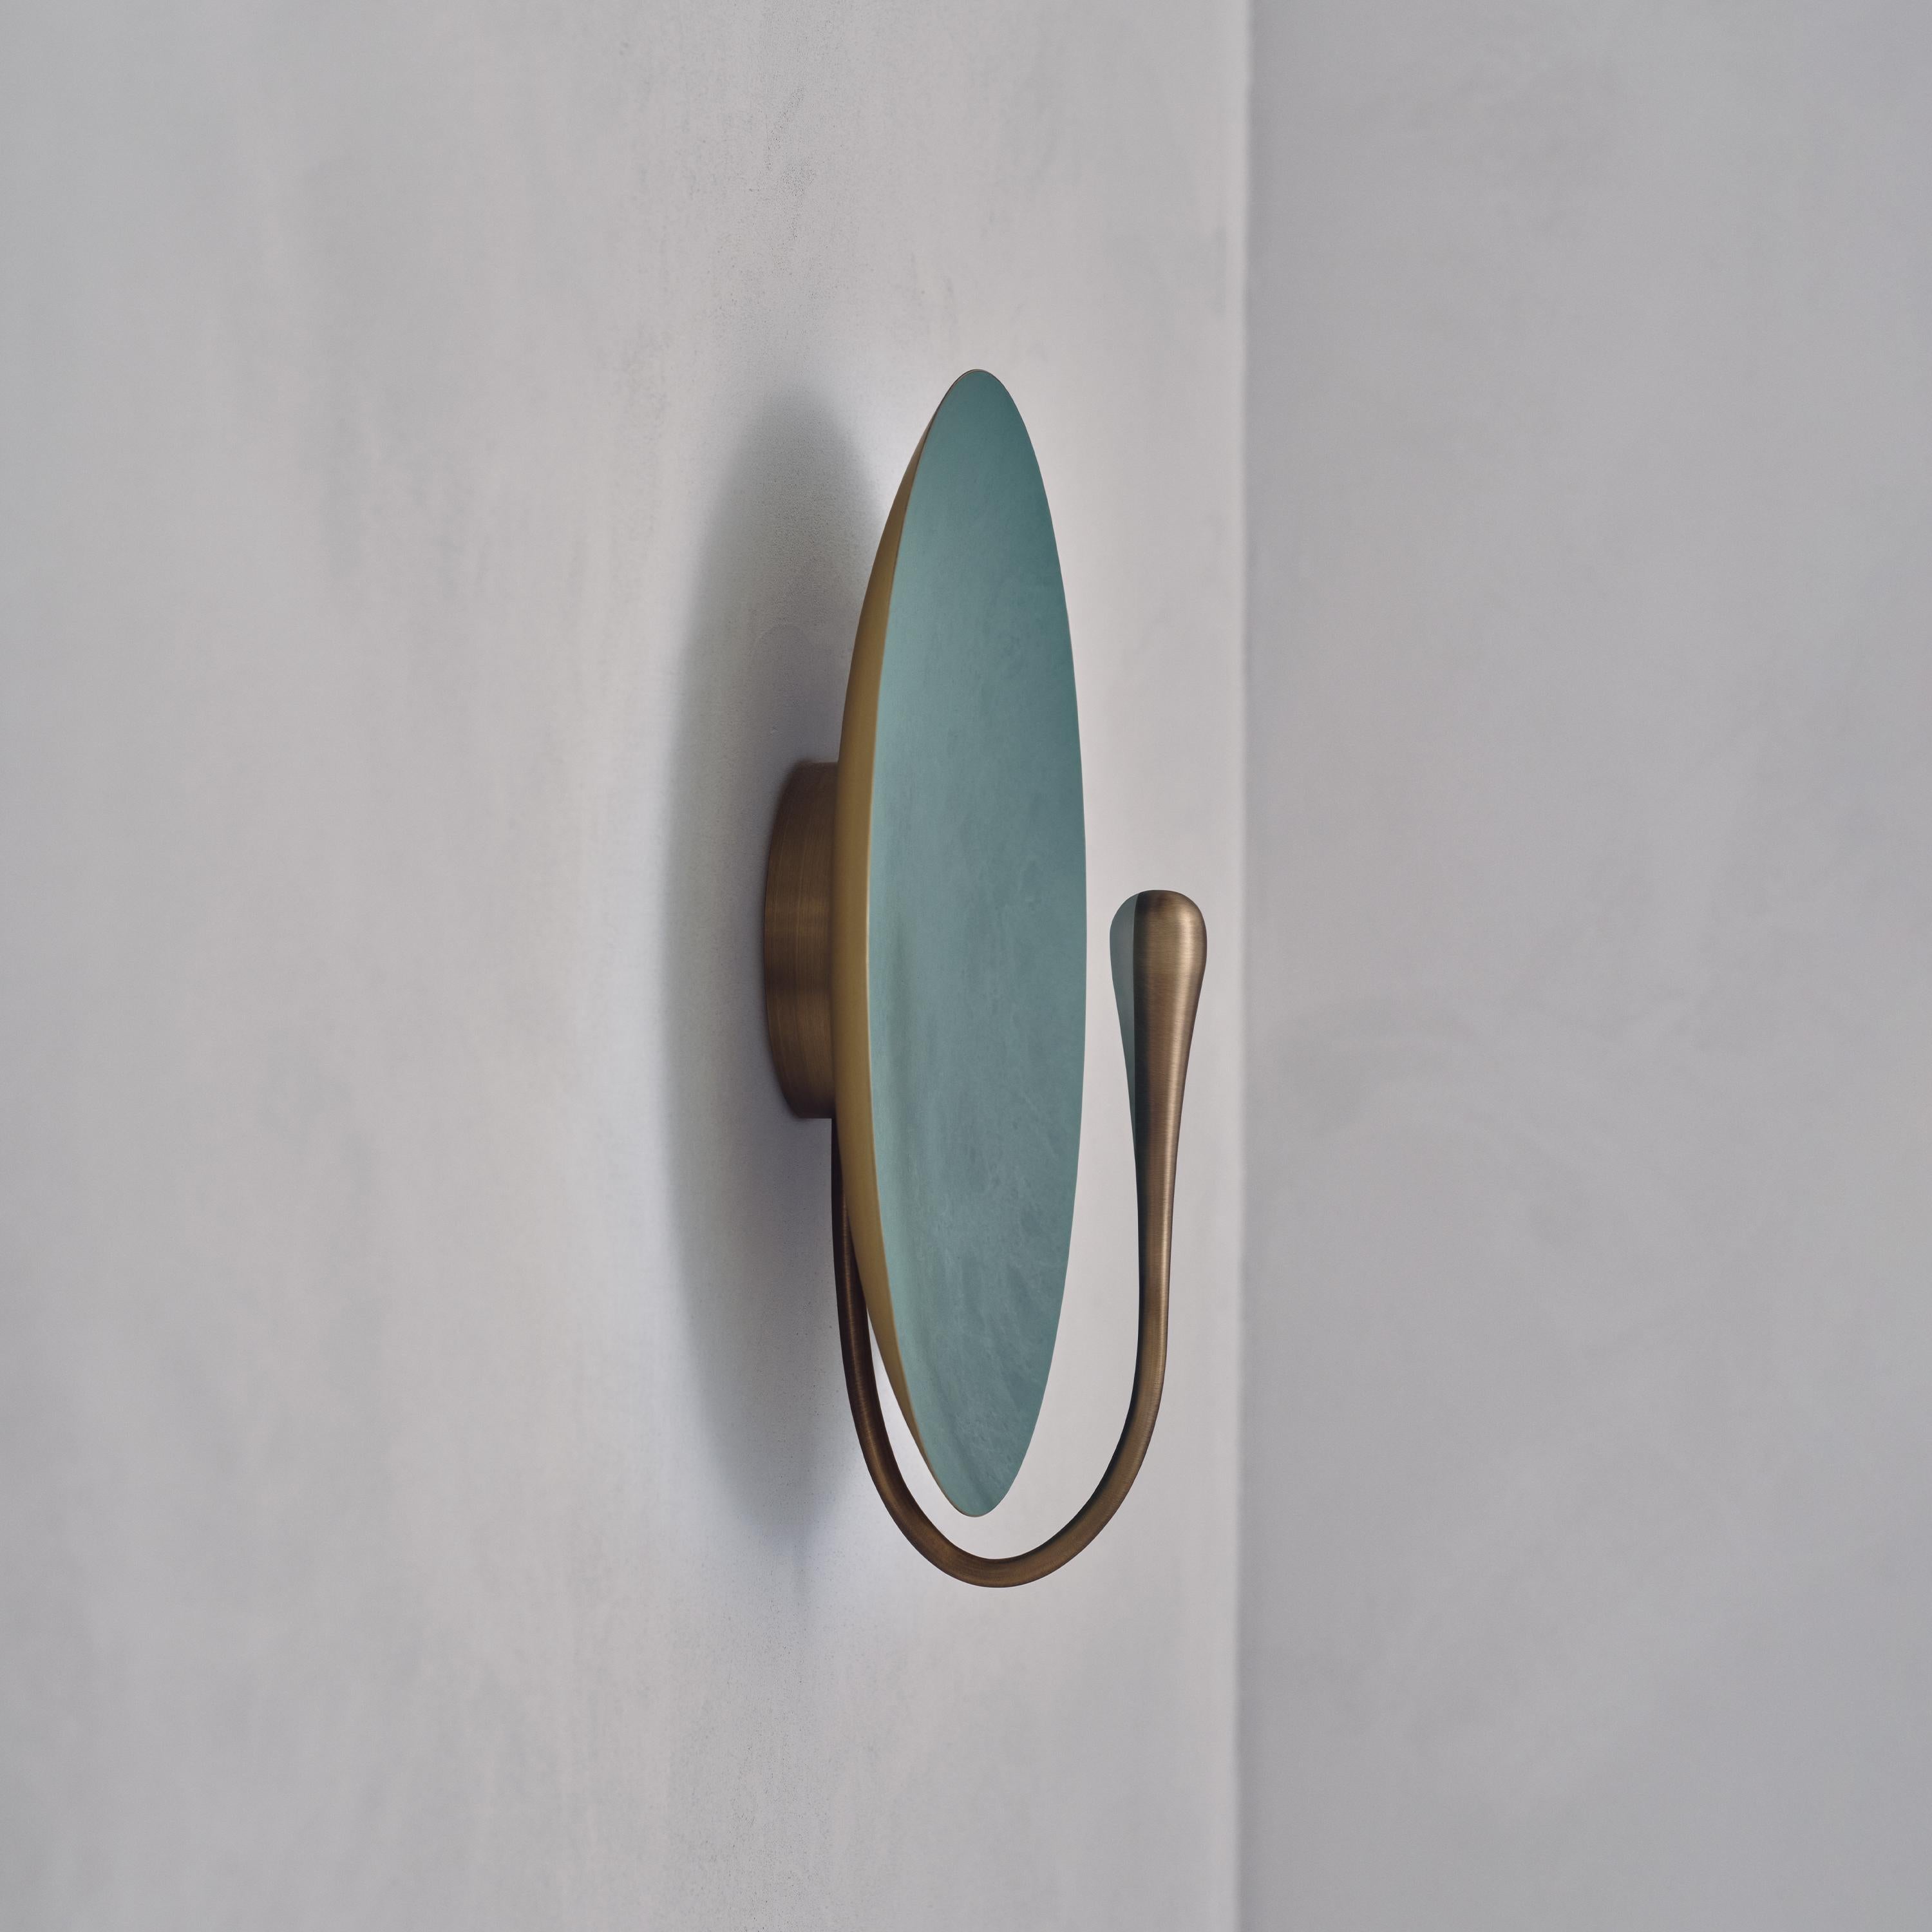 'Cosmic Verdigris' Handmade Patinated Brass Contemporary Wall Light Sconce For Sale 2